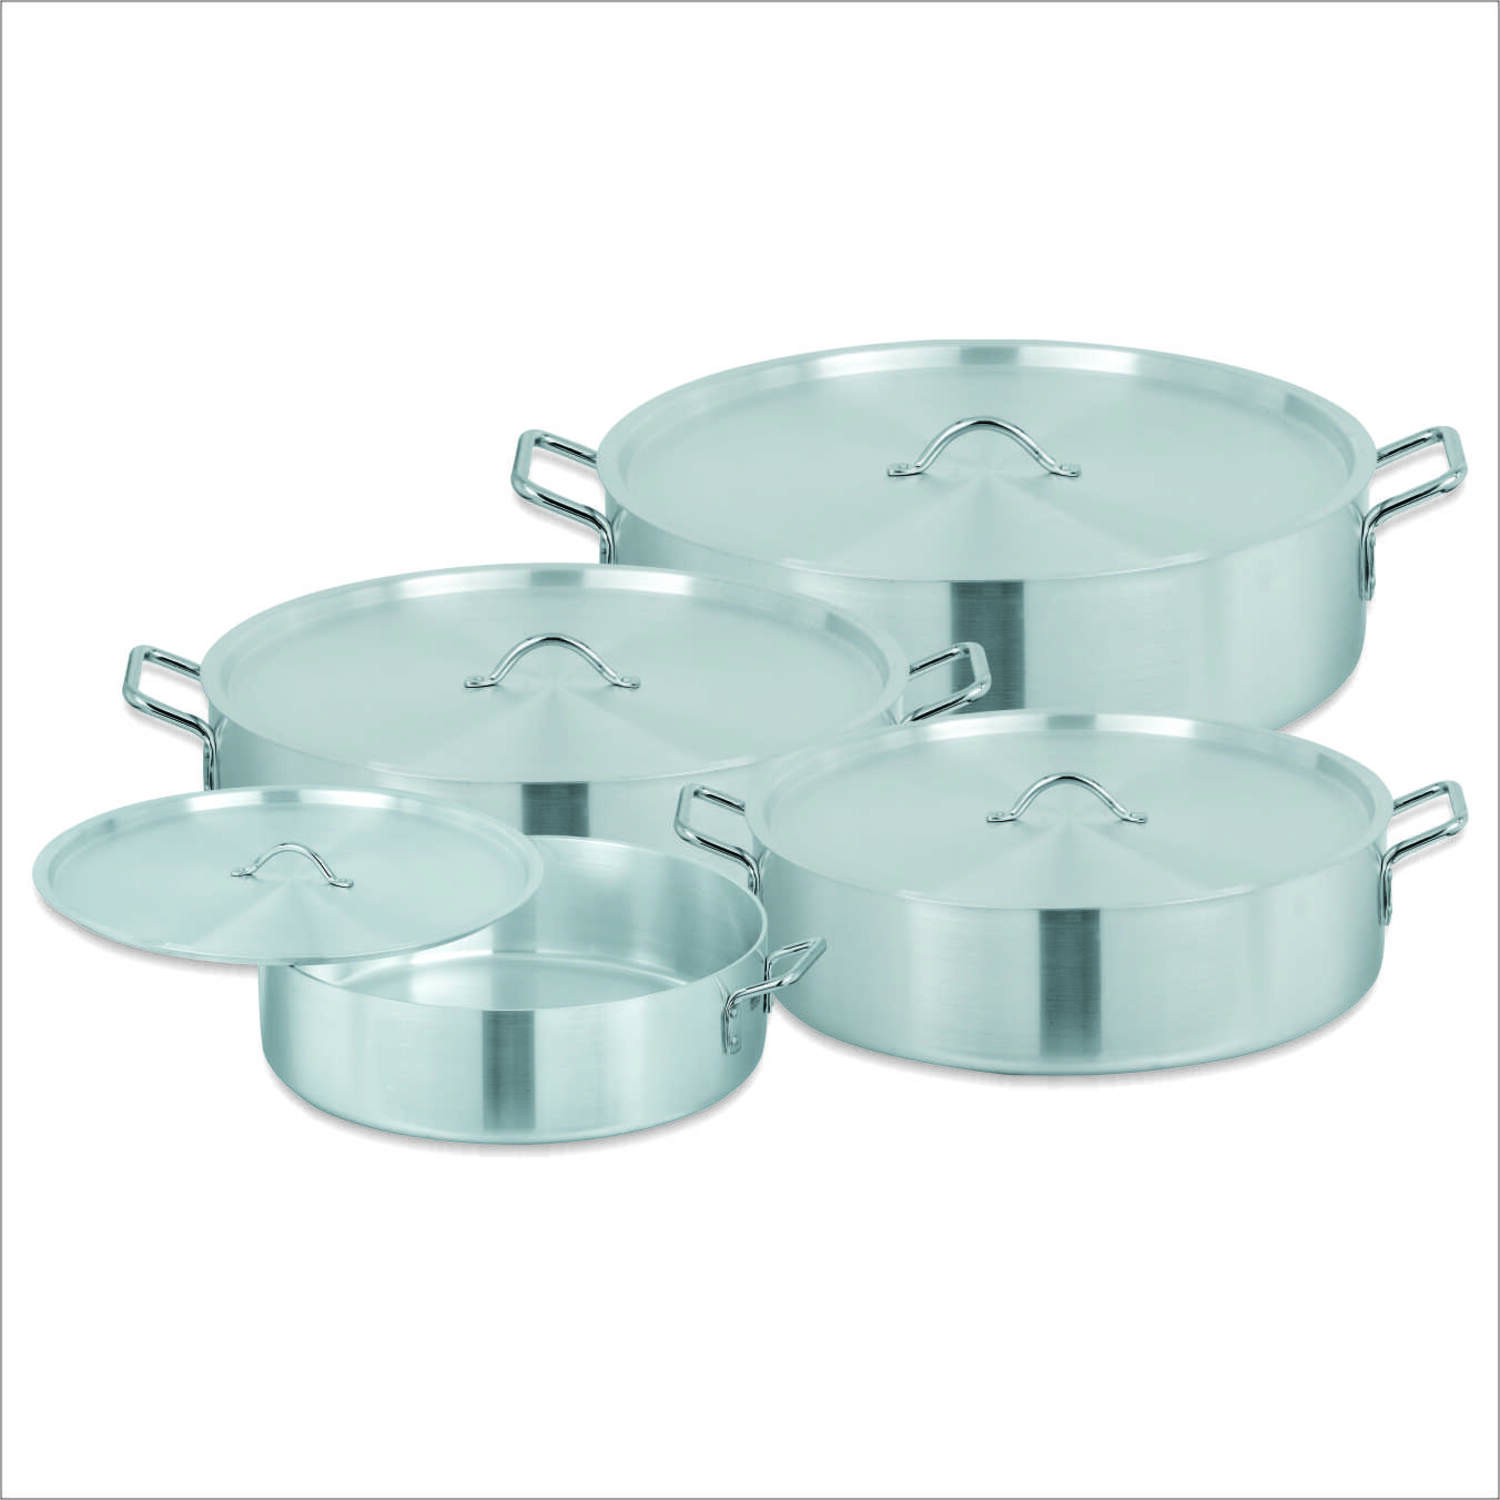 Heavy Metal Finish Easy To Clean Light Weight Sonex Home Kitchen Brazier Cooking Pot 4 Pcs Set 1x4 Size 35.5/40.5/46/51 Cm With Heavy Durable Lid And Handles Original Made In Pakistan